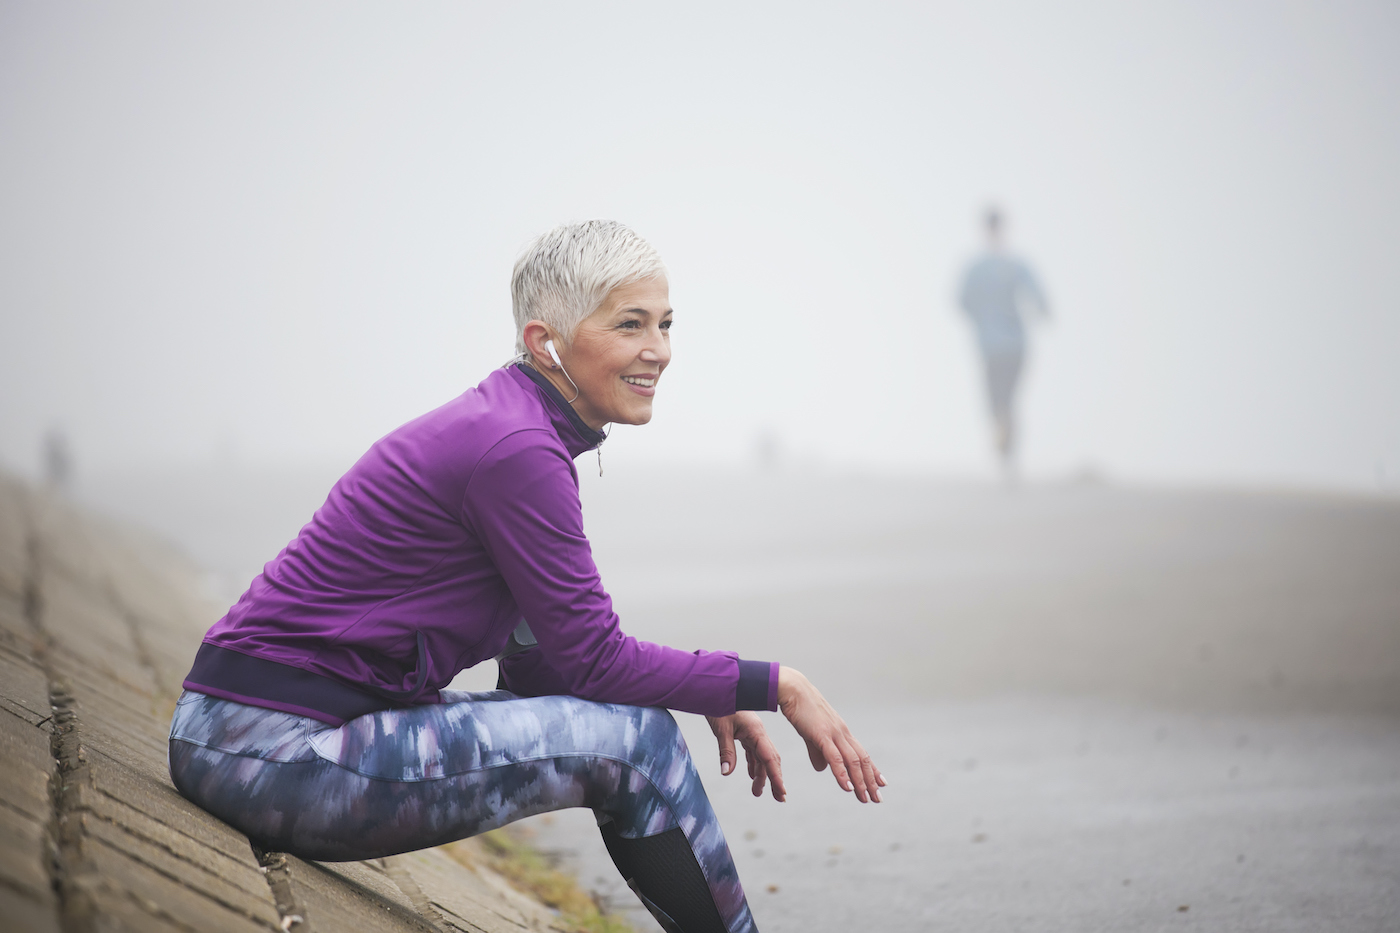 Beautiful mature woman jogging through fog in early autumn day